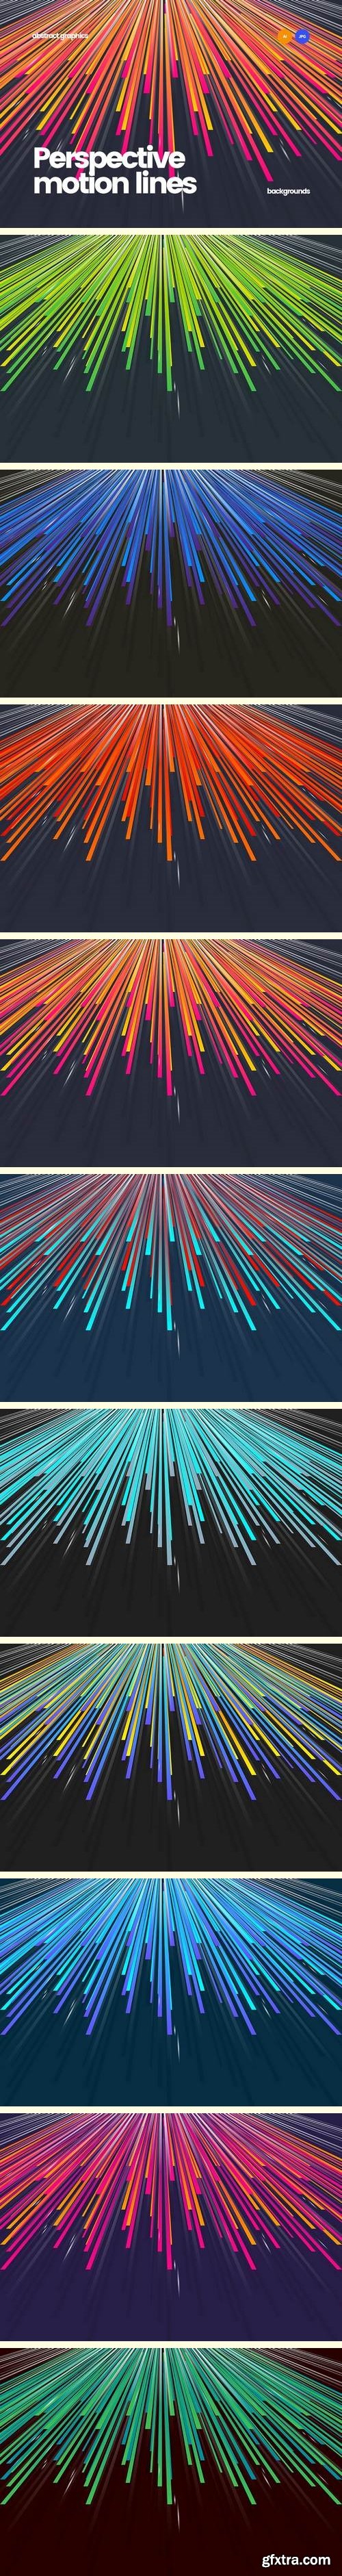 Perspective Motion Lines Backgrounds